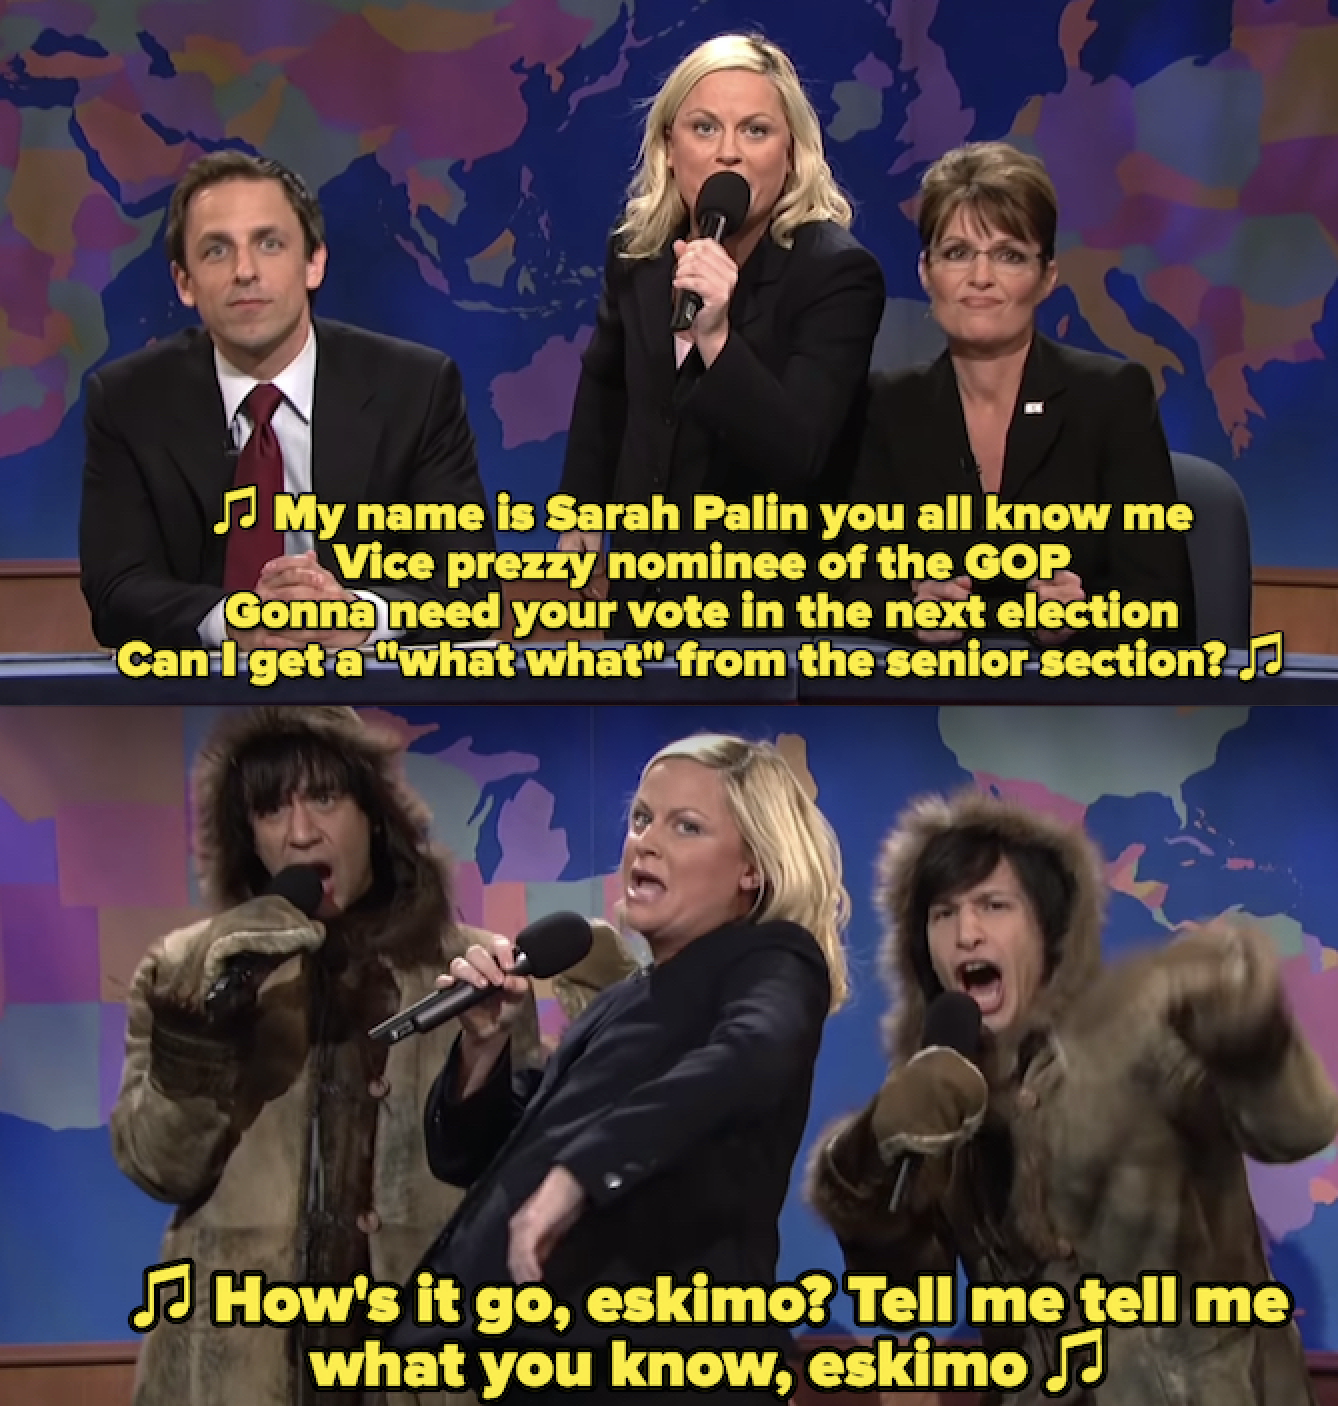 Amy Poehler: &quot;How&#x27;s it go, eskimo? Tell me tell me what you know, eskimo?&quot;